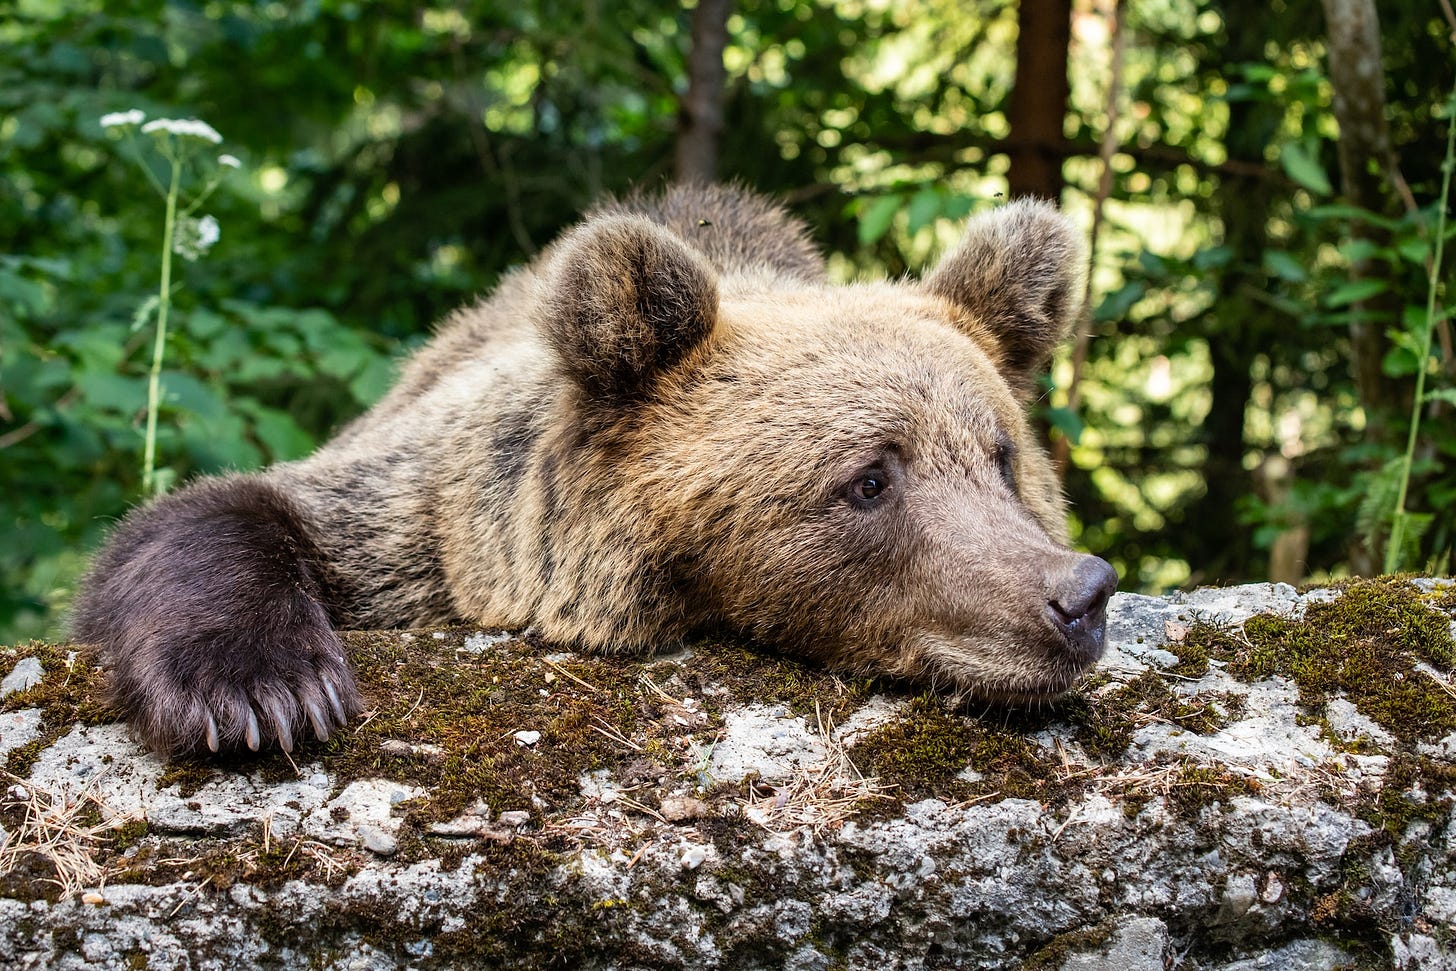 A bear rests head and paw on a log, looking relaxed and at ease